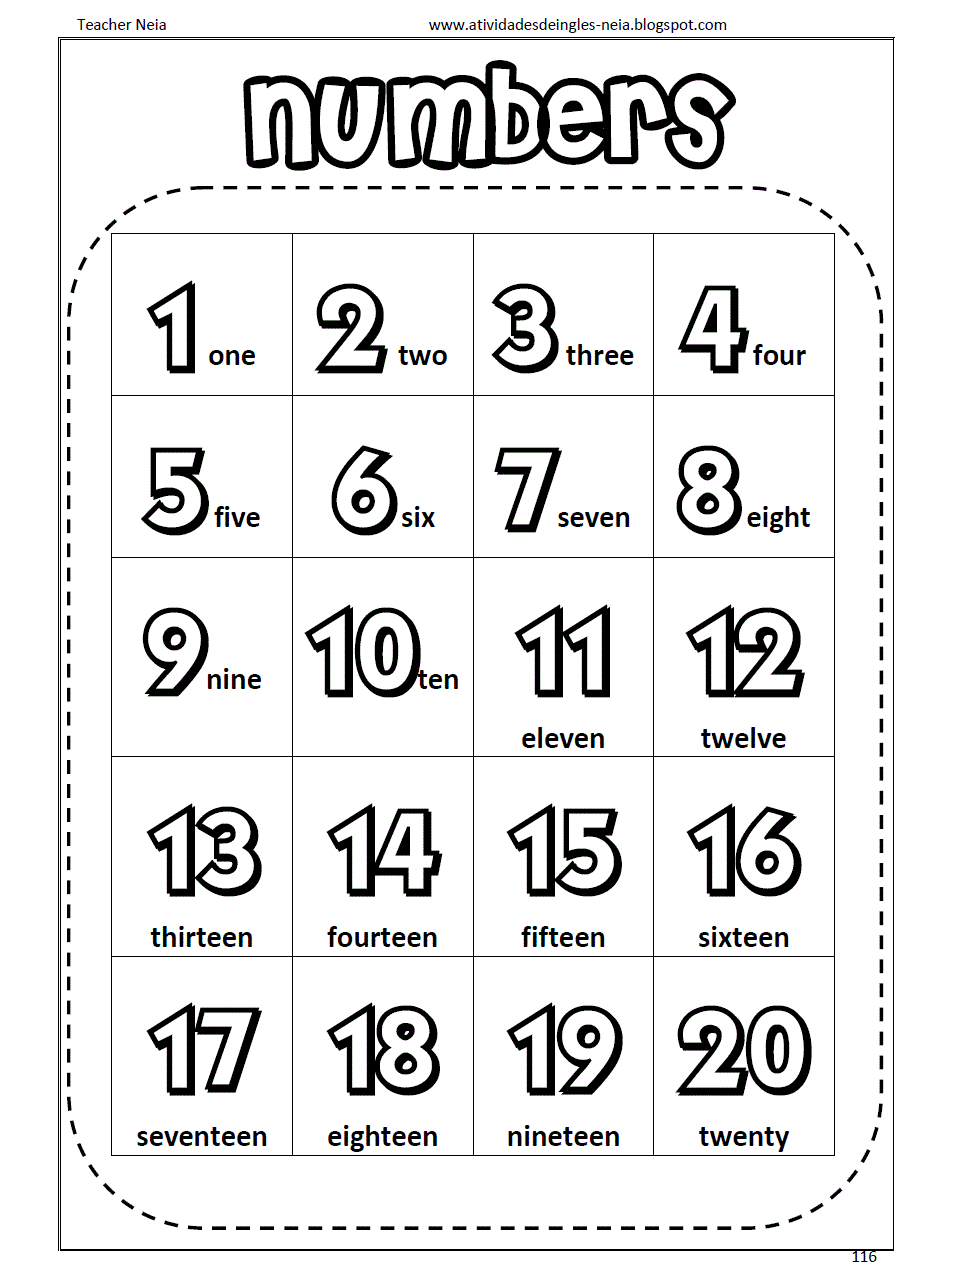 Printable numbers flashcards 1 20 - Flashcards For Learning